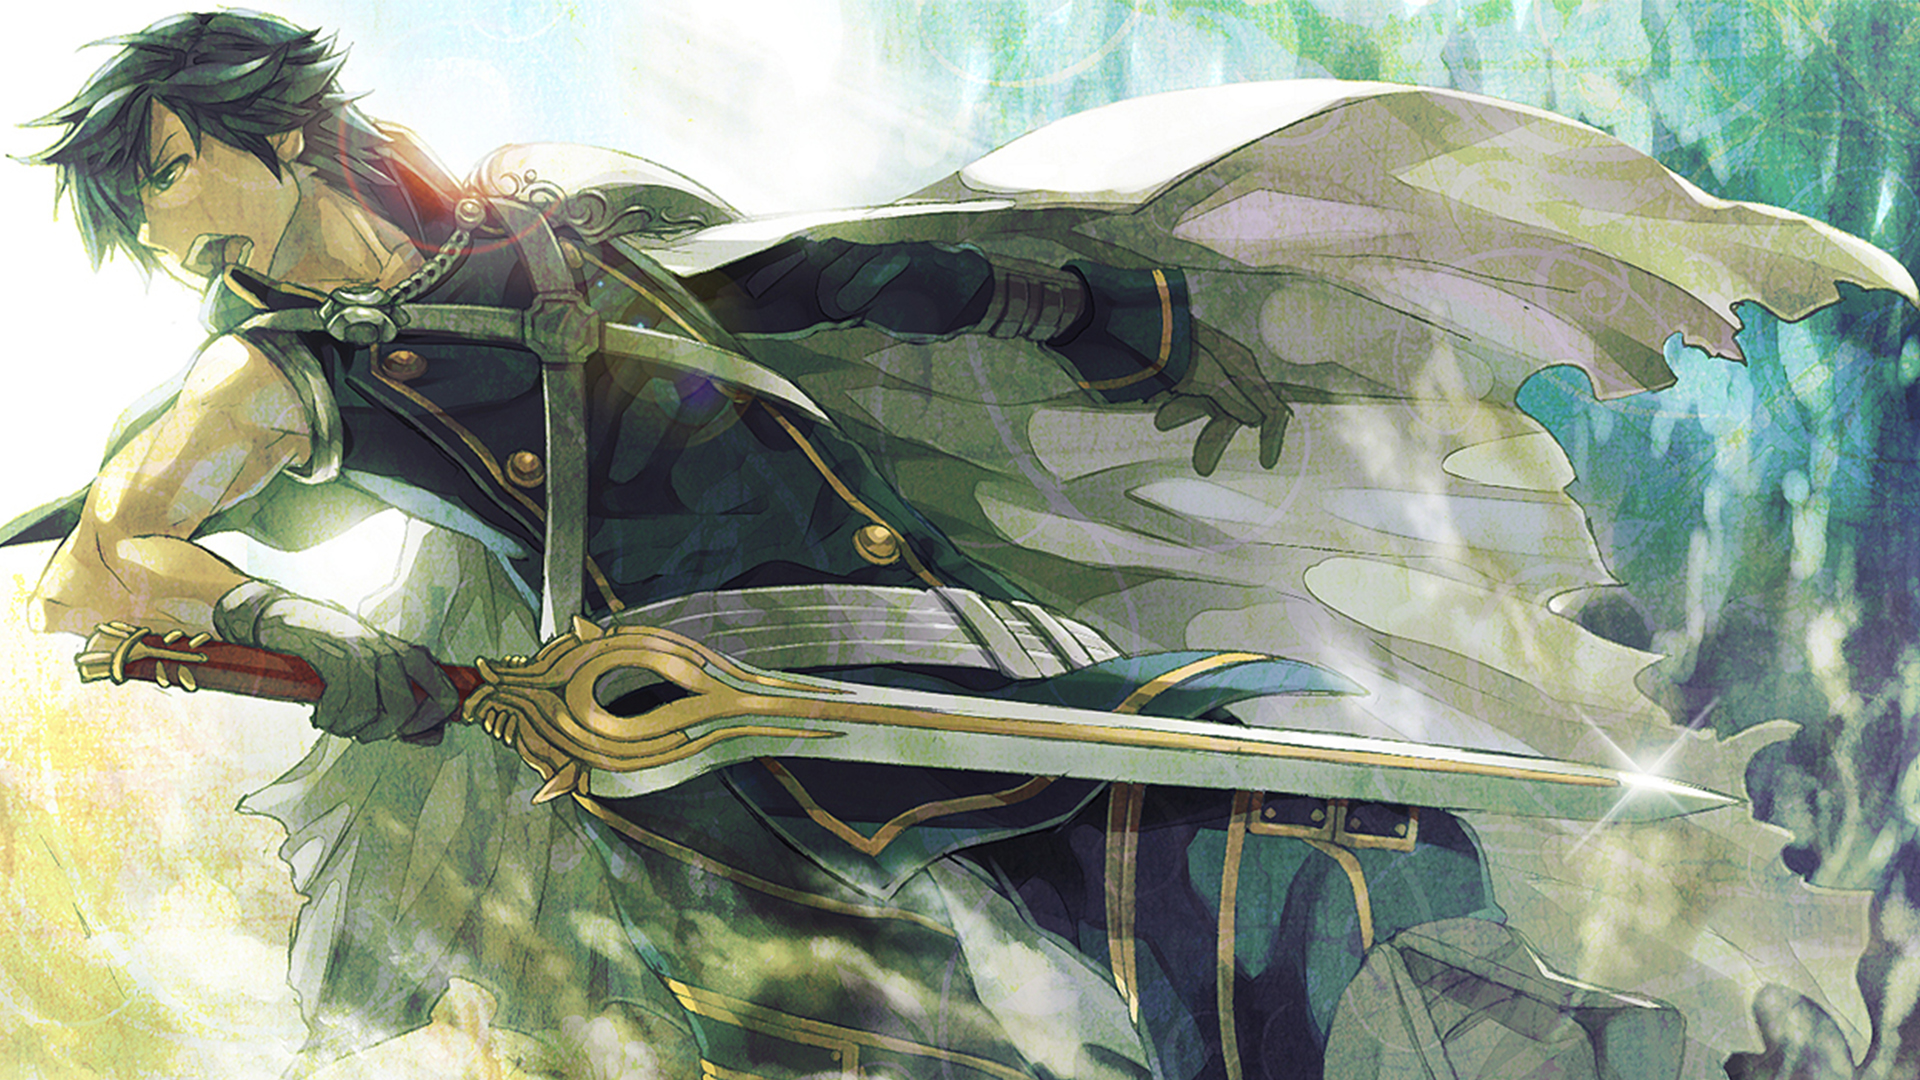 Fire Emblem Awakening Wallpapers, Pictures, Images